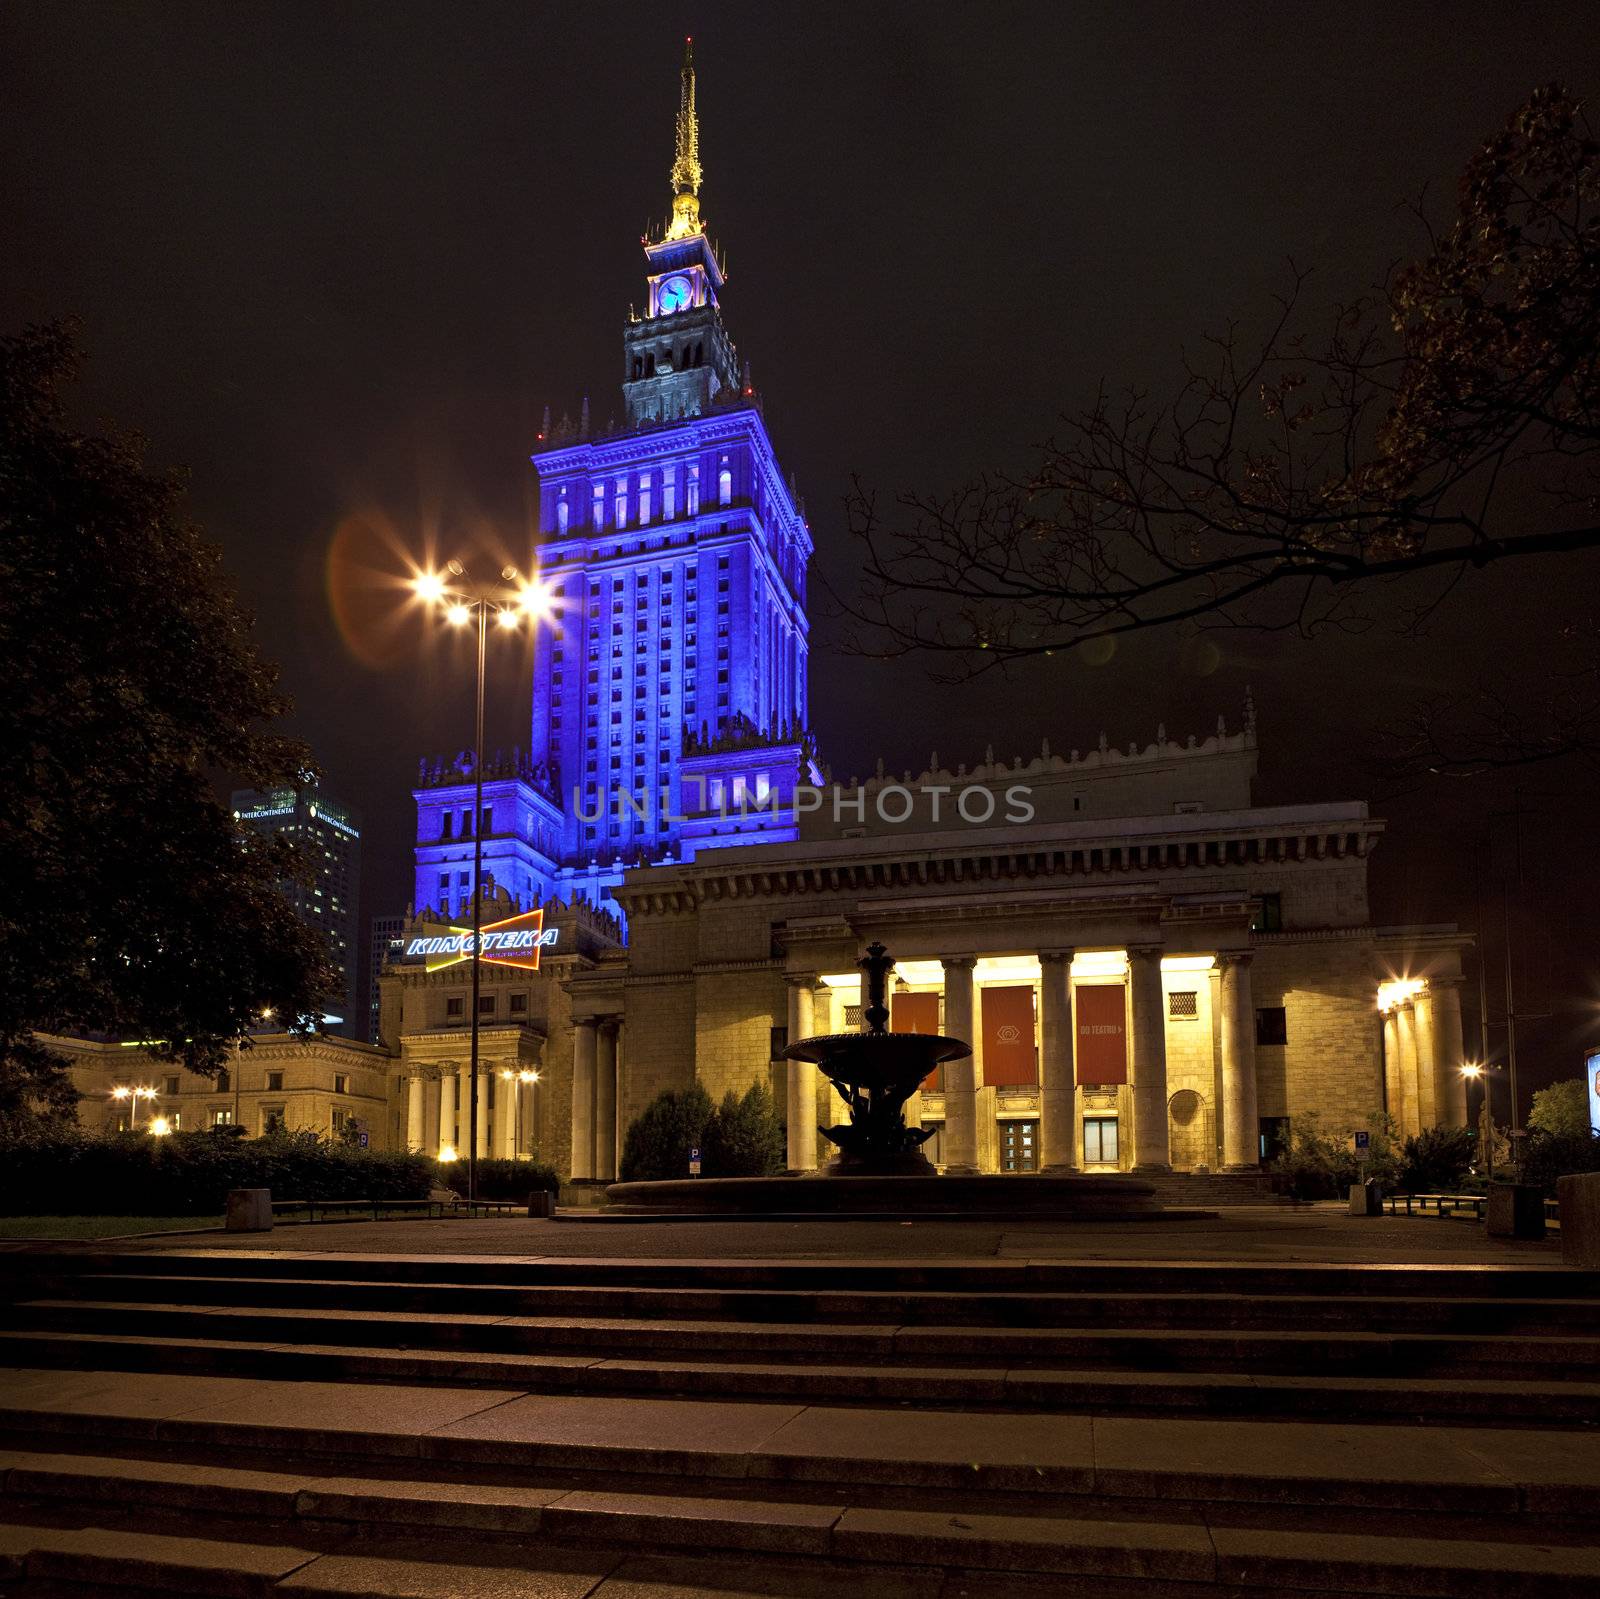 The Palace of Culture and Science in Warsaw.